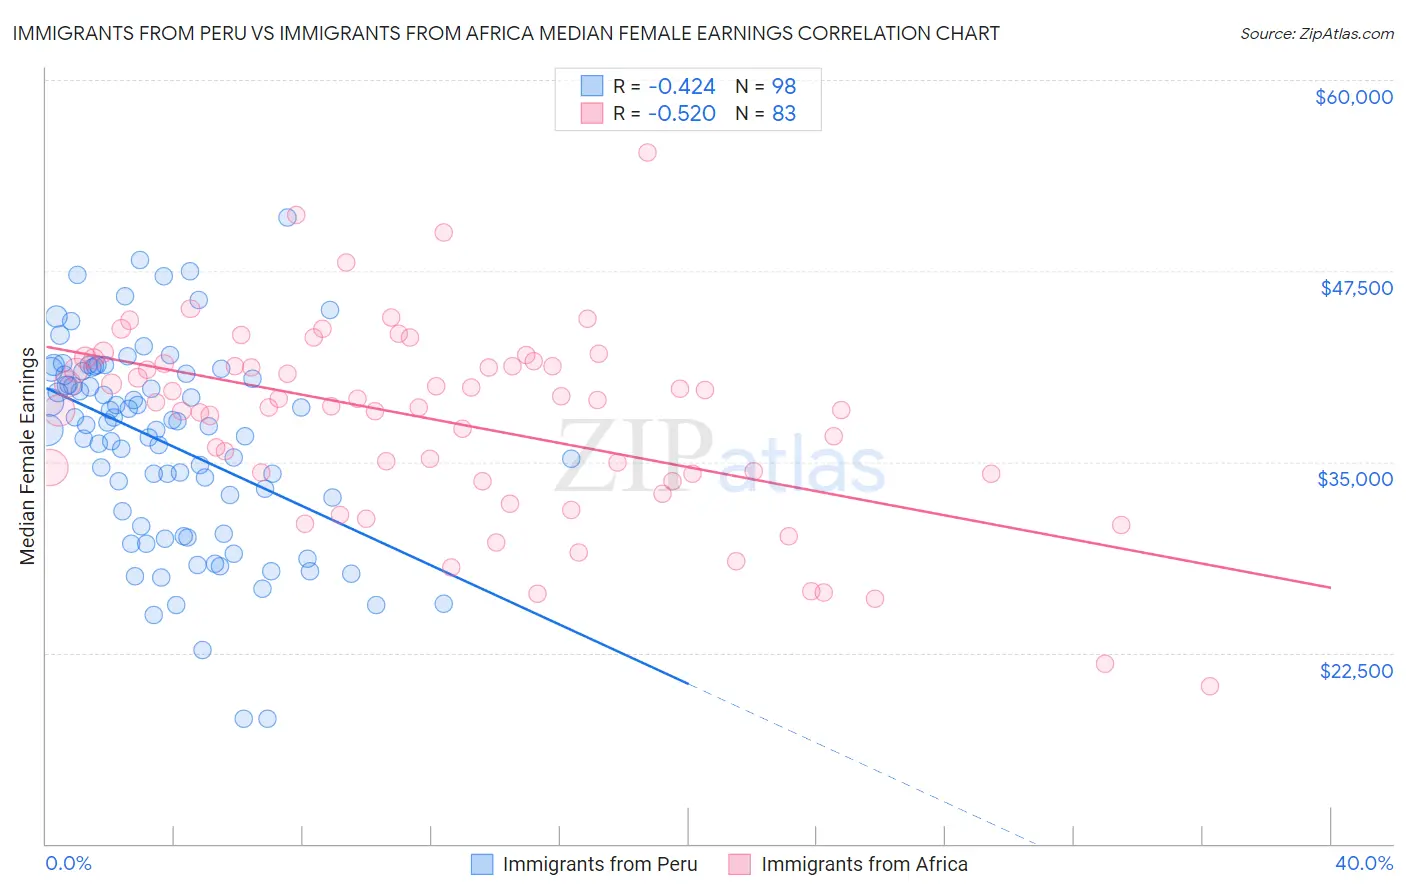 Immigrants from Peru vs Immigrants from Africa Median Female Earnings